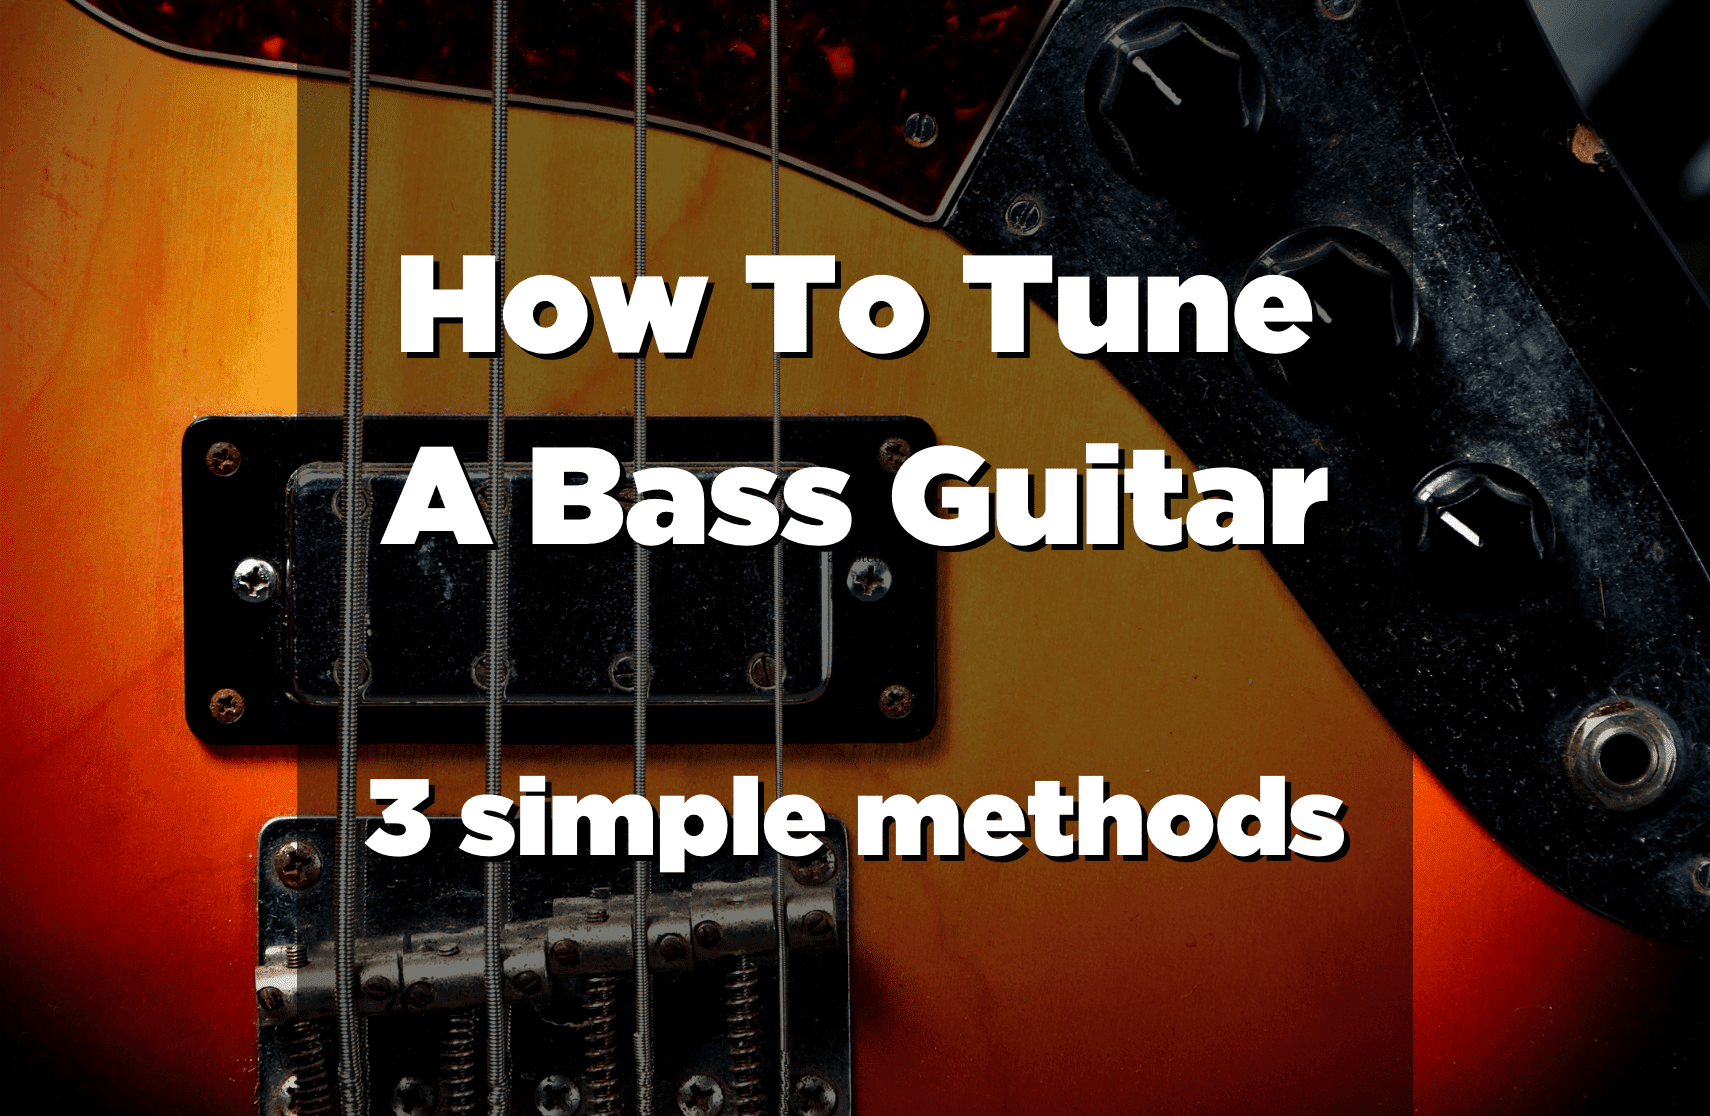 Bass Tuning. Tune Bass Maniac. Notes Bass for Tuning. String Guide on Bass. Tune bass